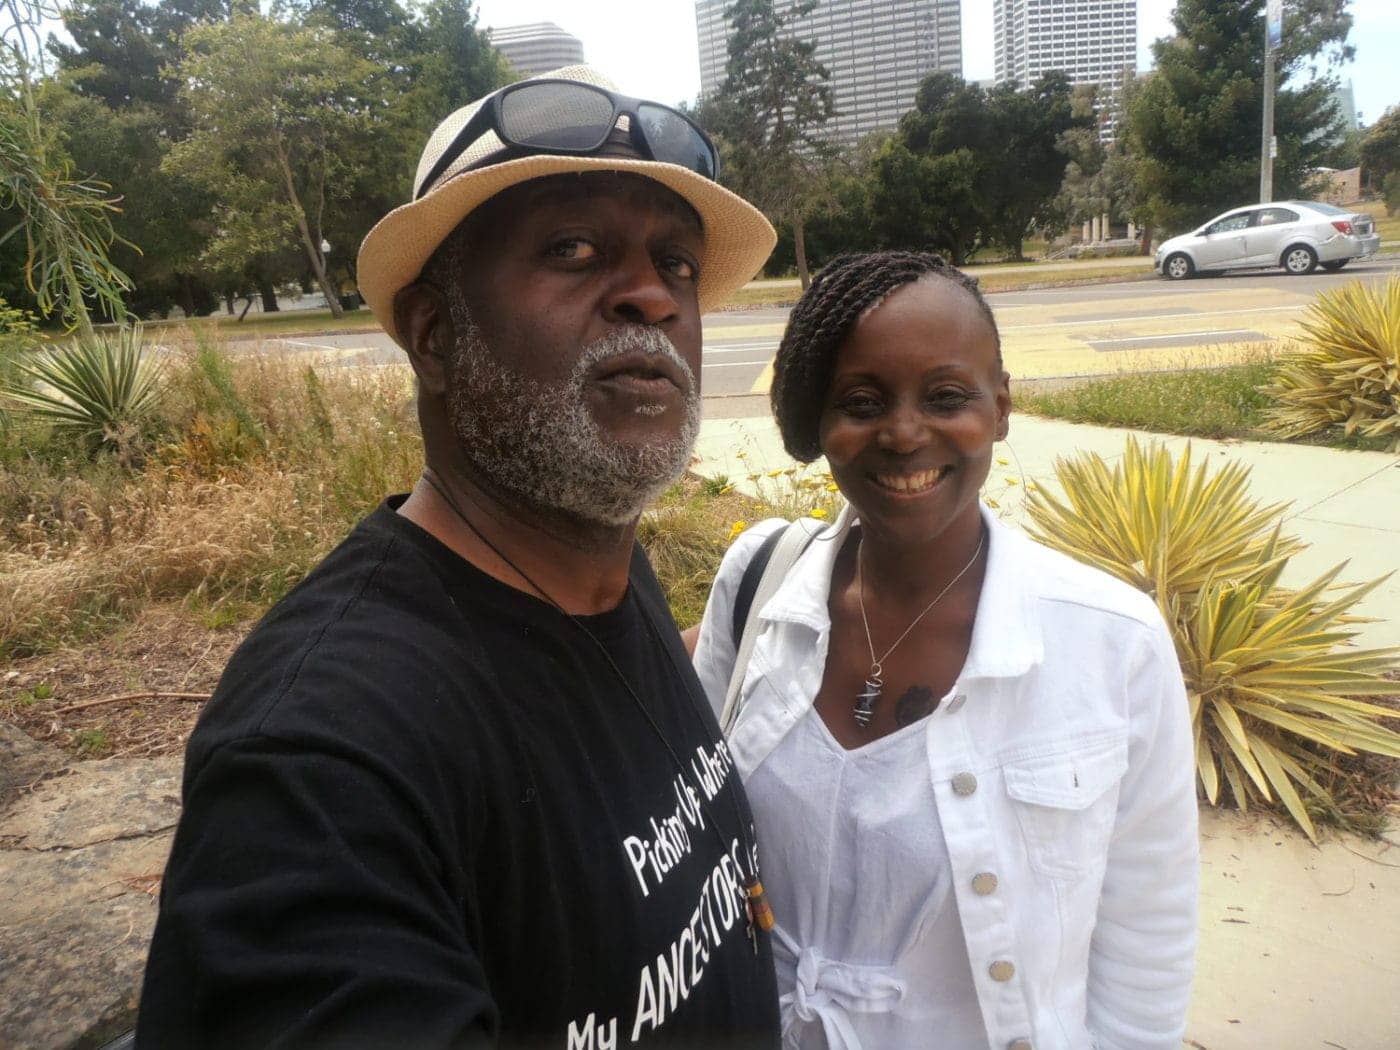 Queen-Jah-nine-with-Baba-Jahahara-at-Lake-Merritt-by-Jahahara-0822-1400x1050, Demand merciful, compassionate release for Dr. Mutulu Shakur now! And for all our wrongfully-encaged political leaders!, Behind Enemy Lines News & Views 